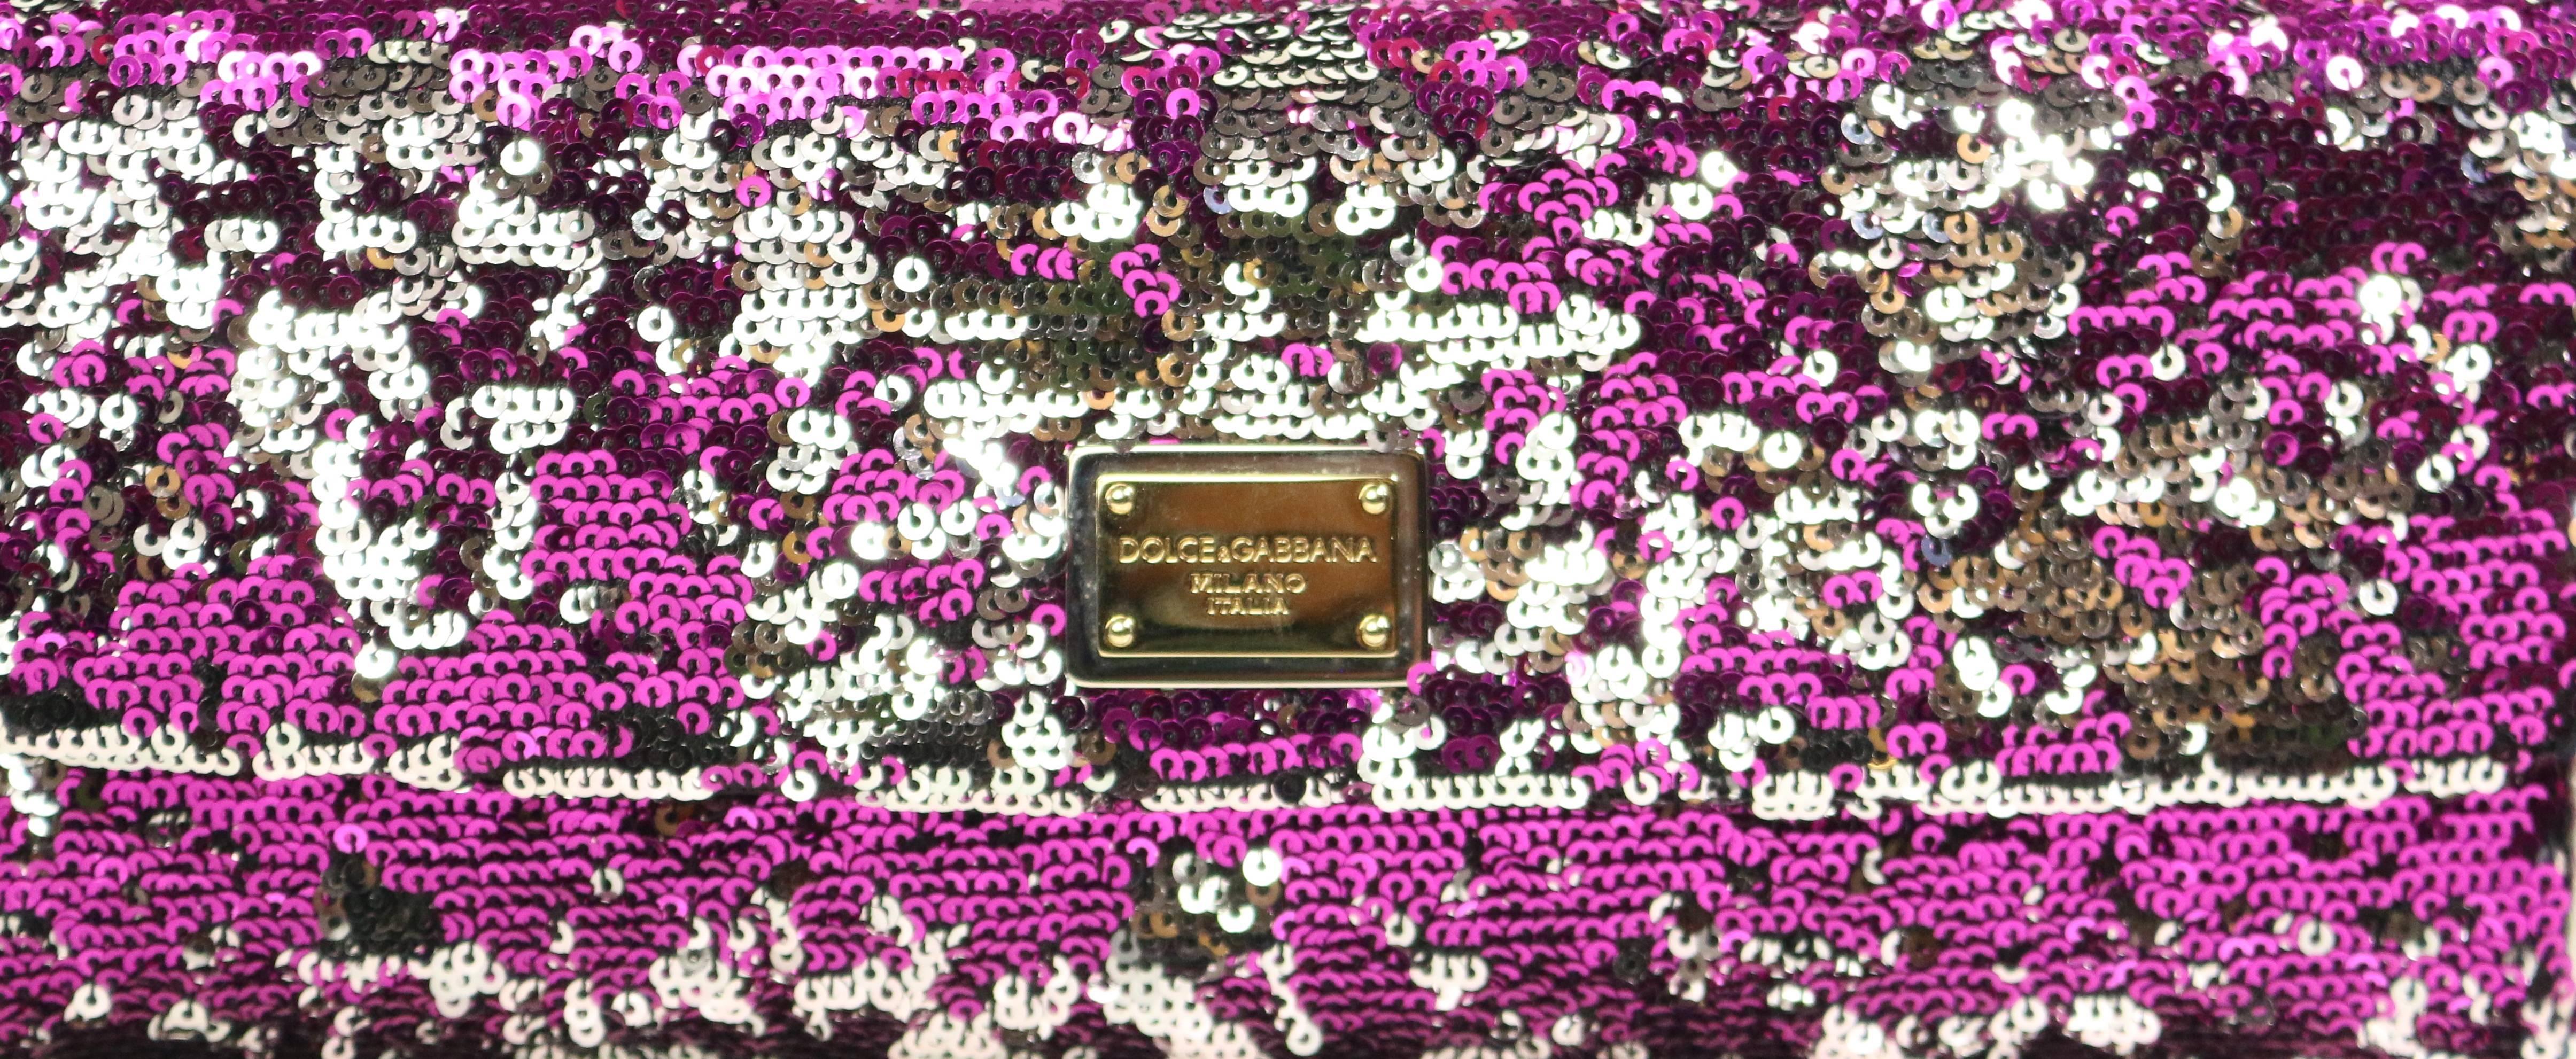 - Dolce and Gabbana pink/silver/black sequins shoulder bag. Featuring a silver, gold and black metal hardware chain strap, silver metallic leather trimming and inner flap with black satin interior and one small interior slip pocket. A magnetic